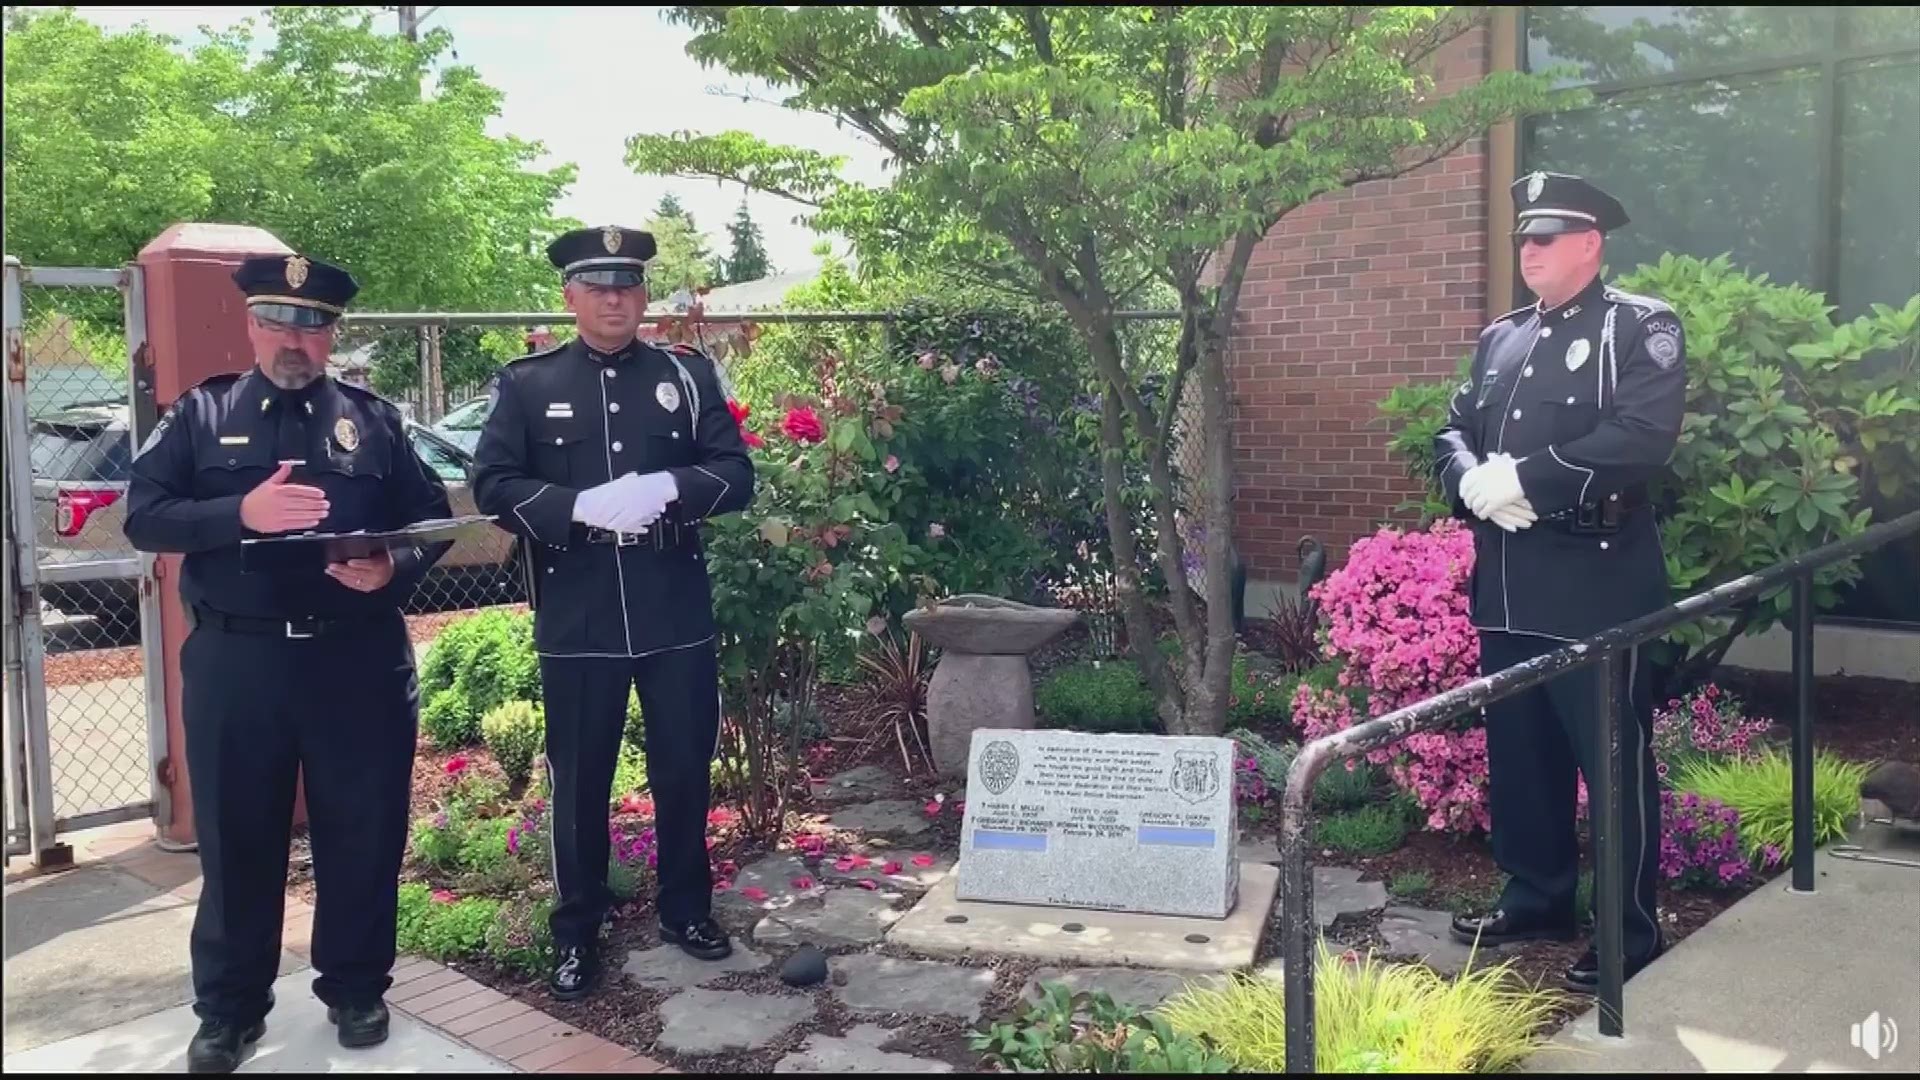 Fallen Kent Officer Diego Moreno’s name was added to a memorial stone at the department’s headquarters Friday.